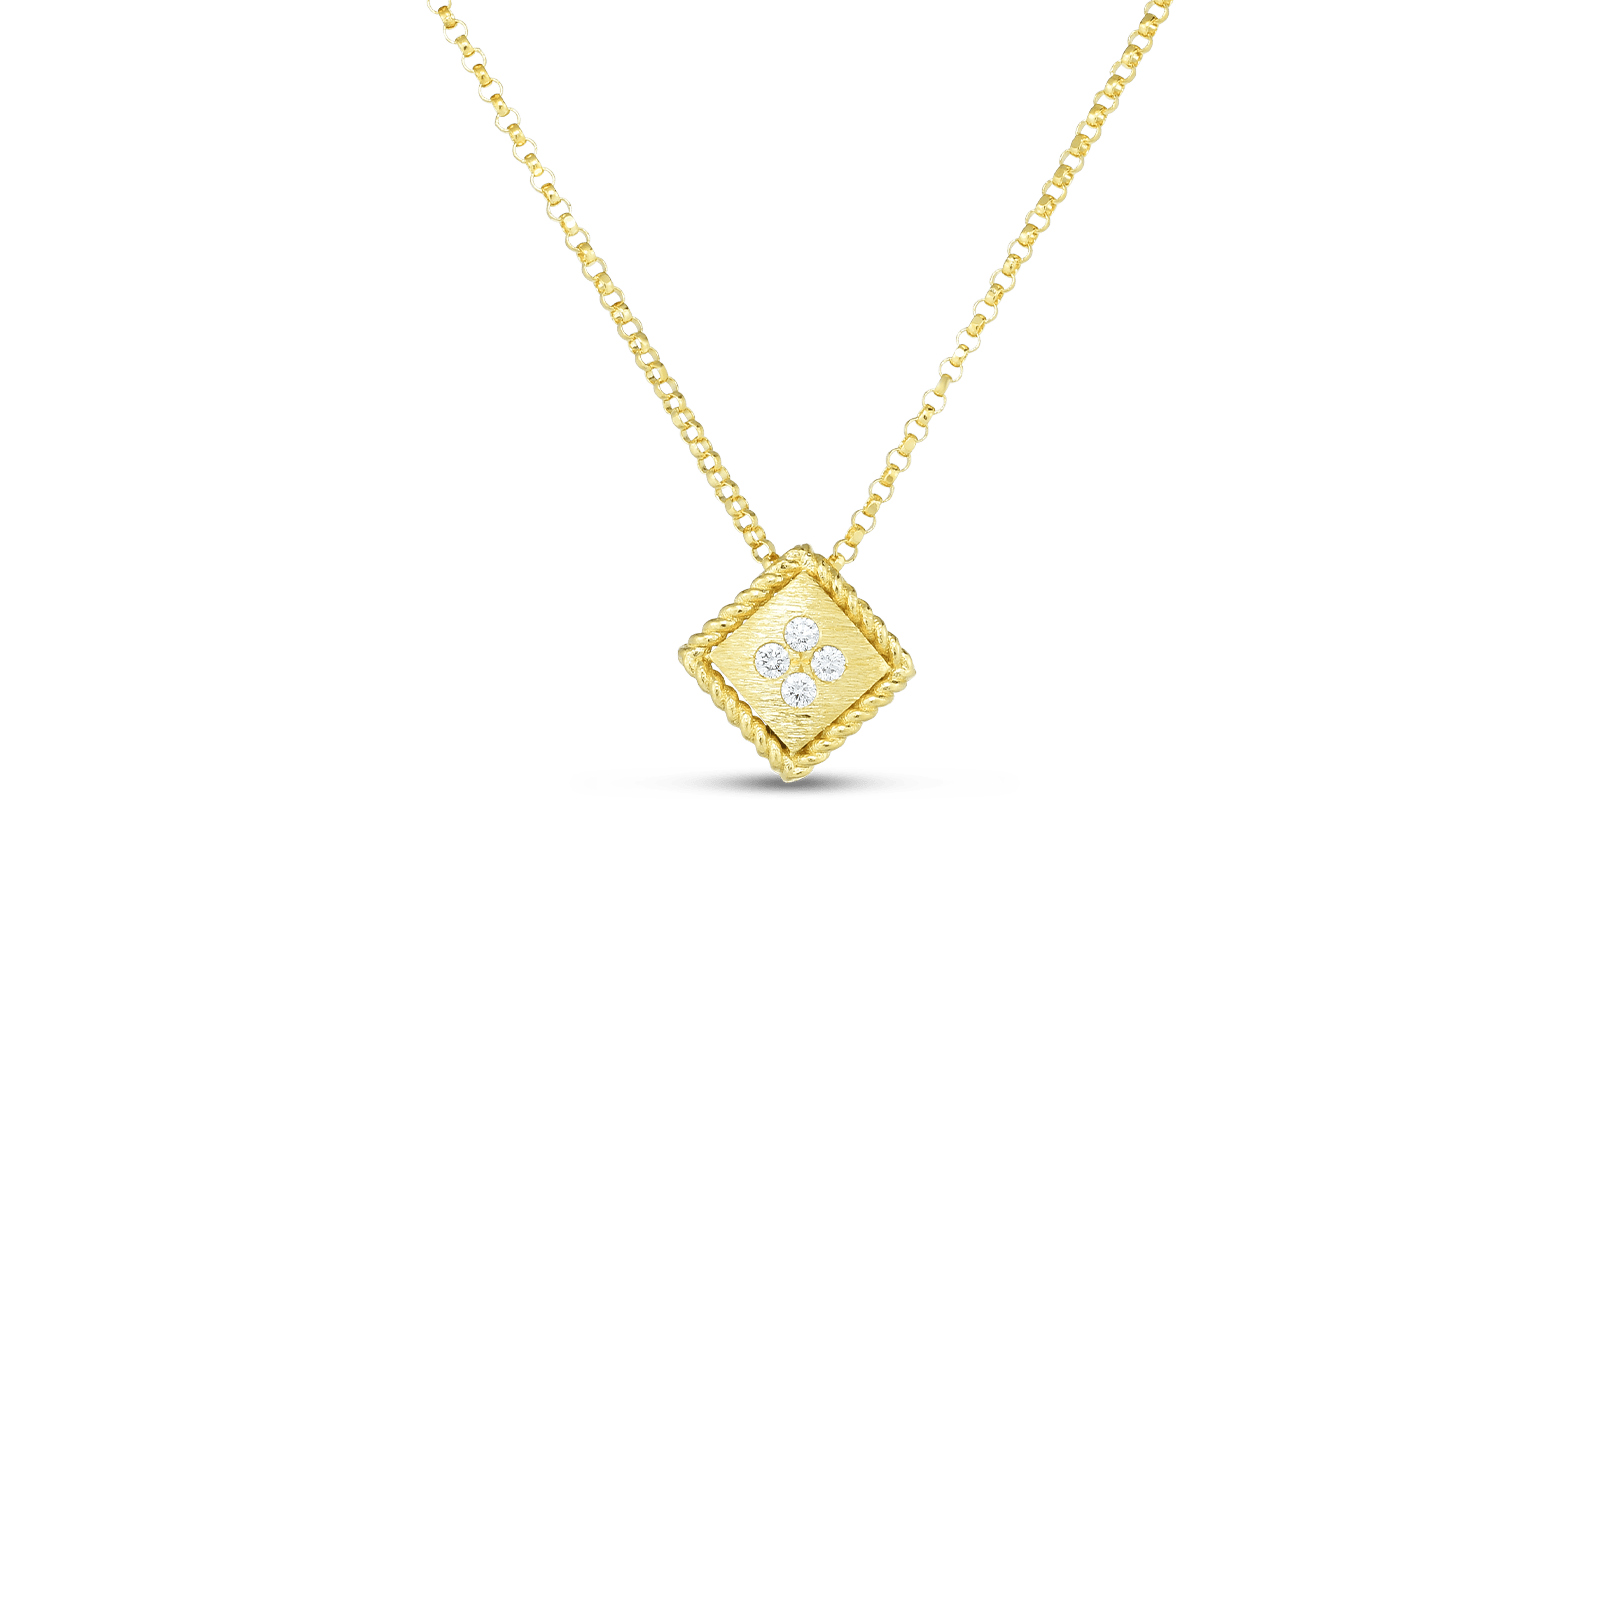 Palazzo Ducale Small Satin Pendant Necklace 18K Gold with Diamonds